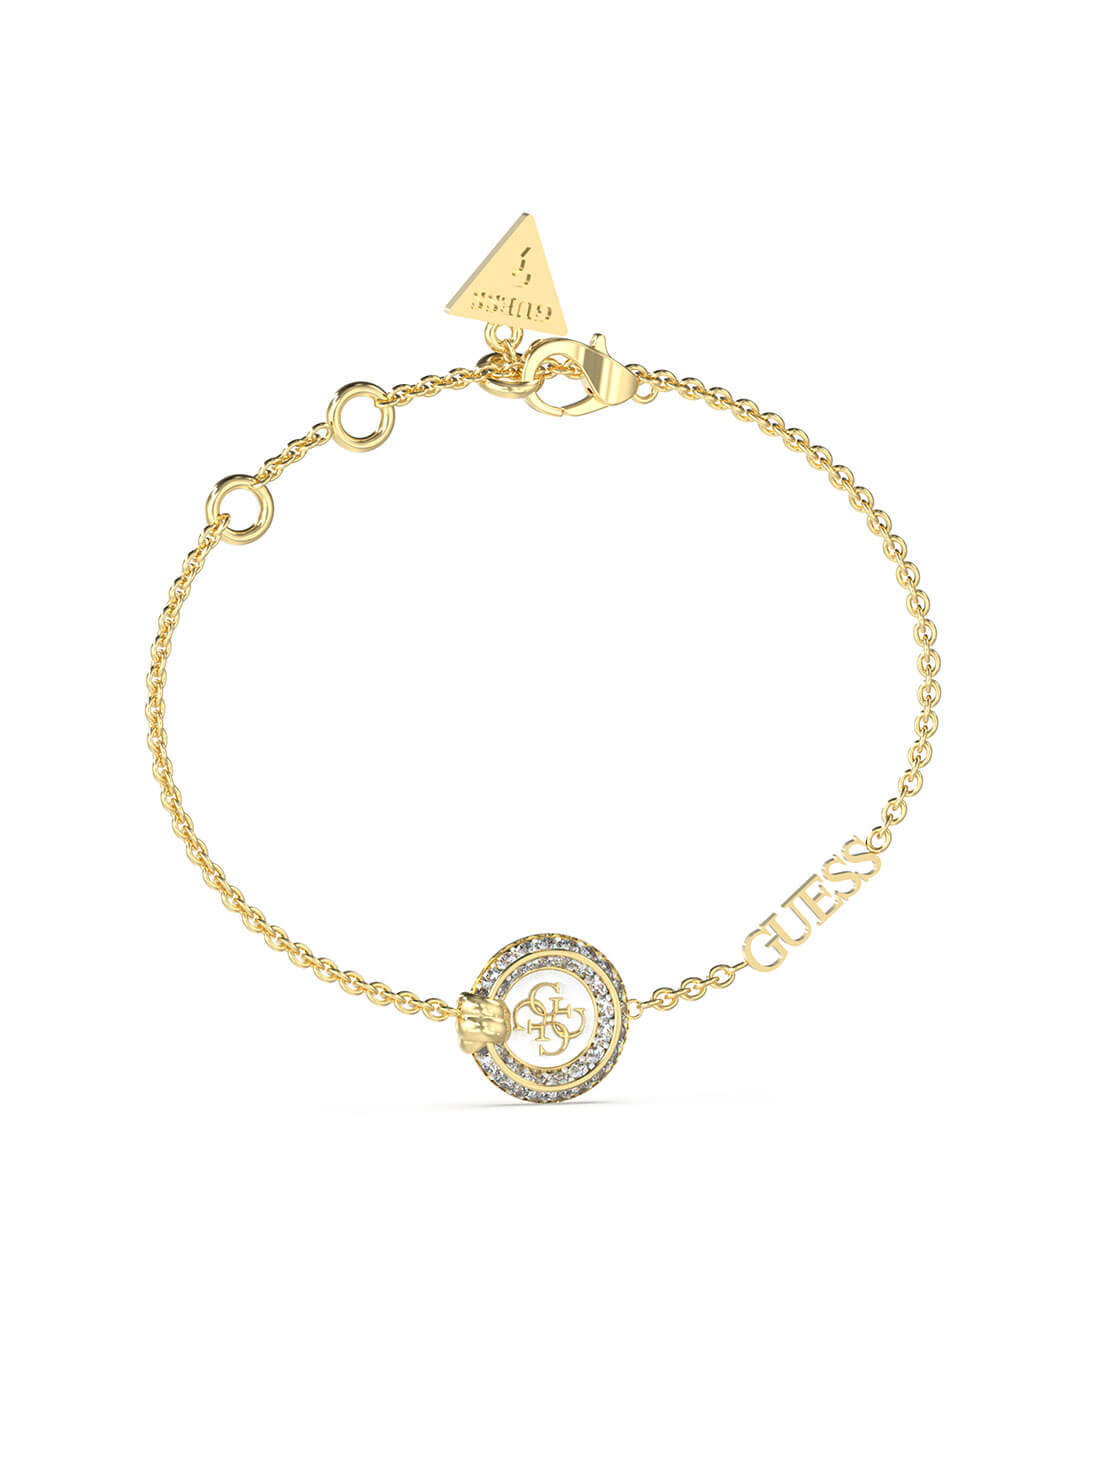 Gold Knot You White Crystal Bracelet | GUESS Women's Jewellery | front view